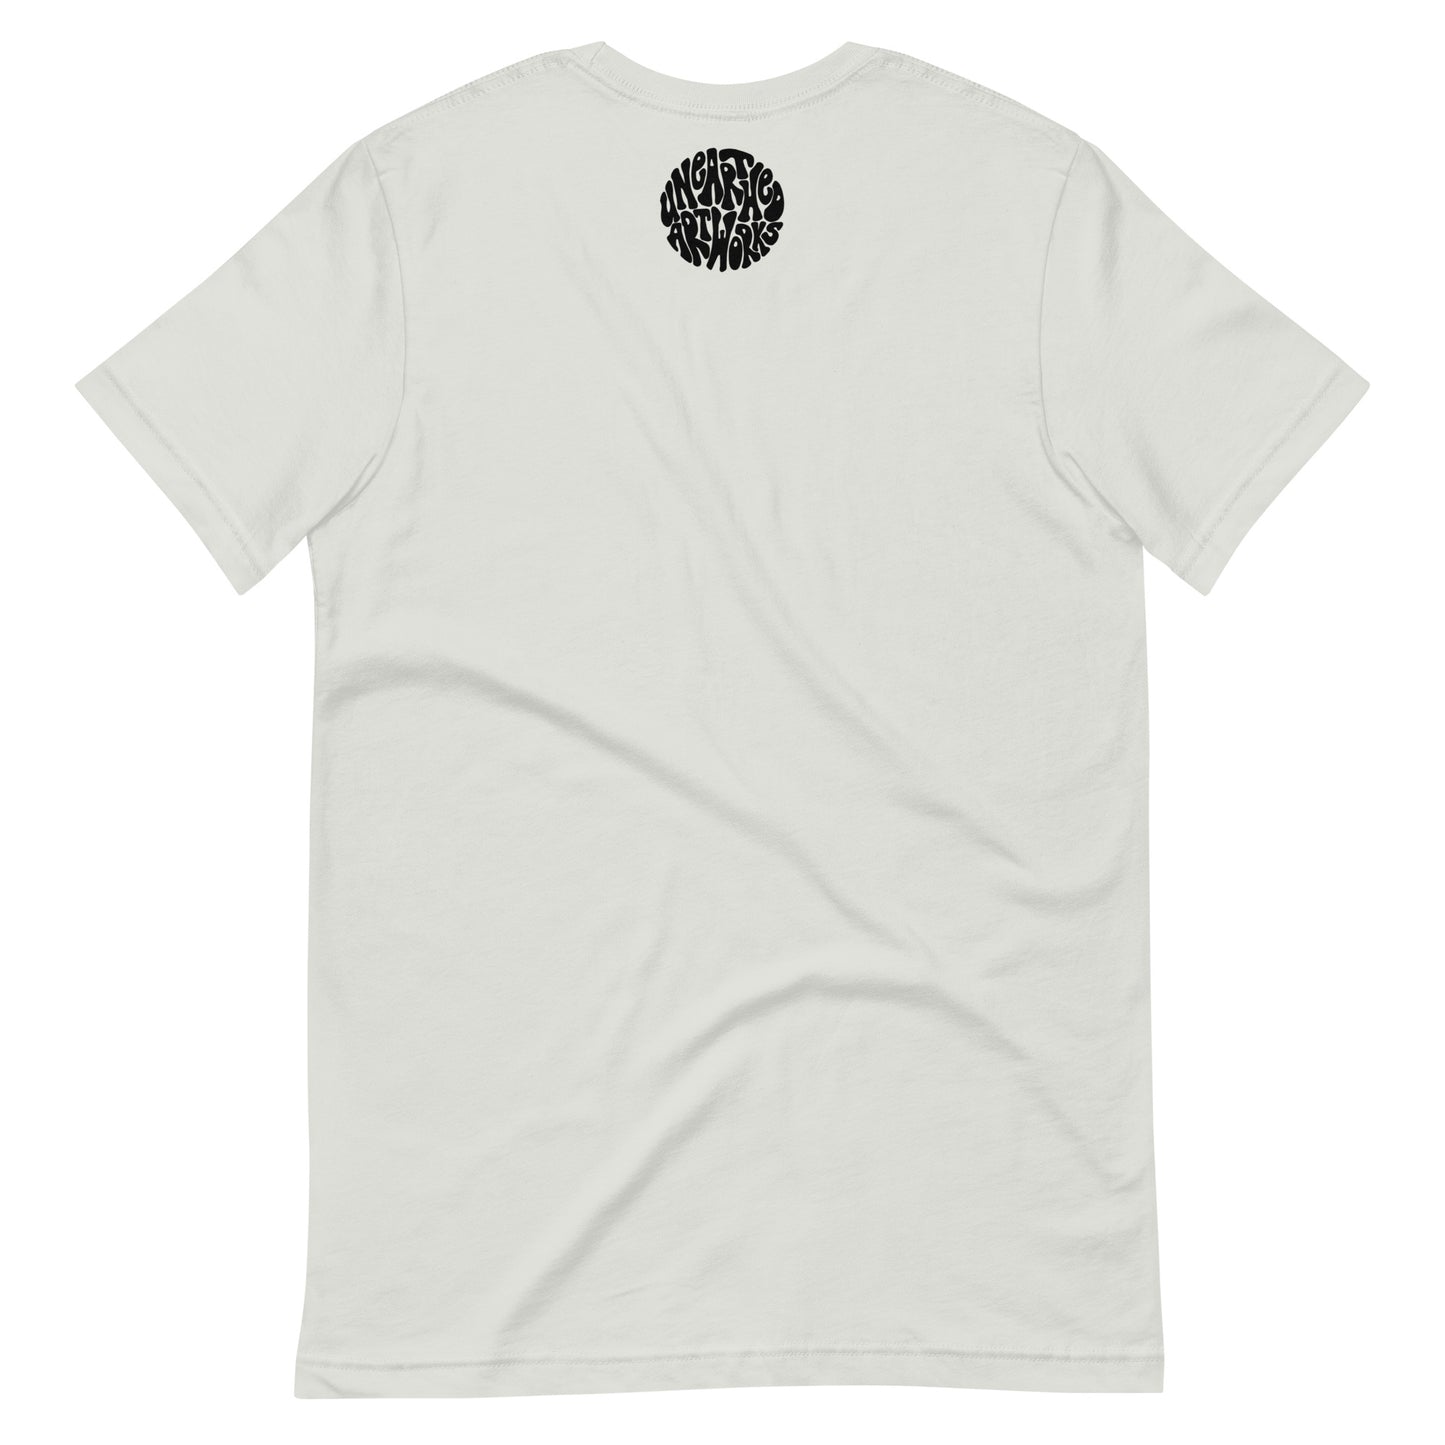 unearthed mountains t-shirt